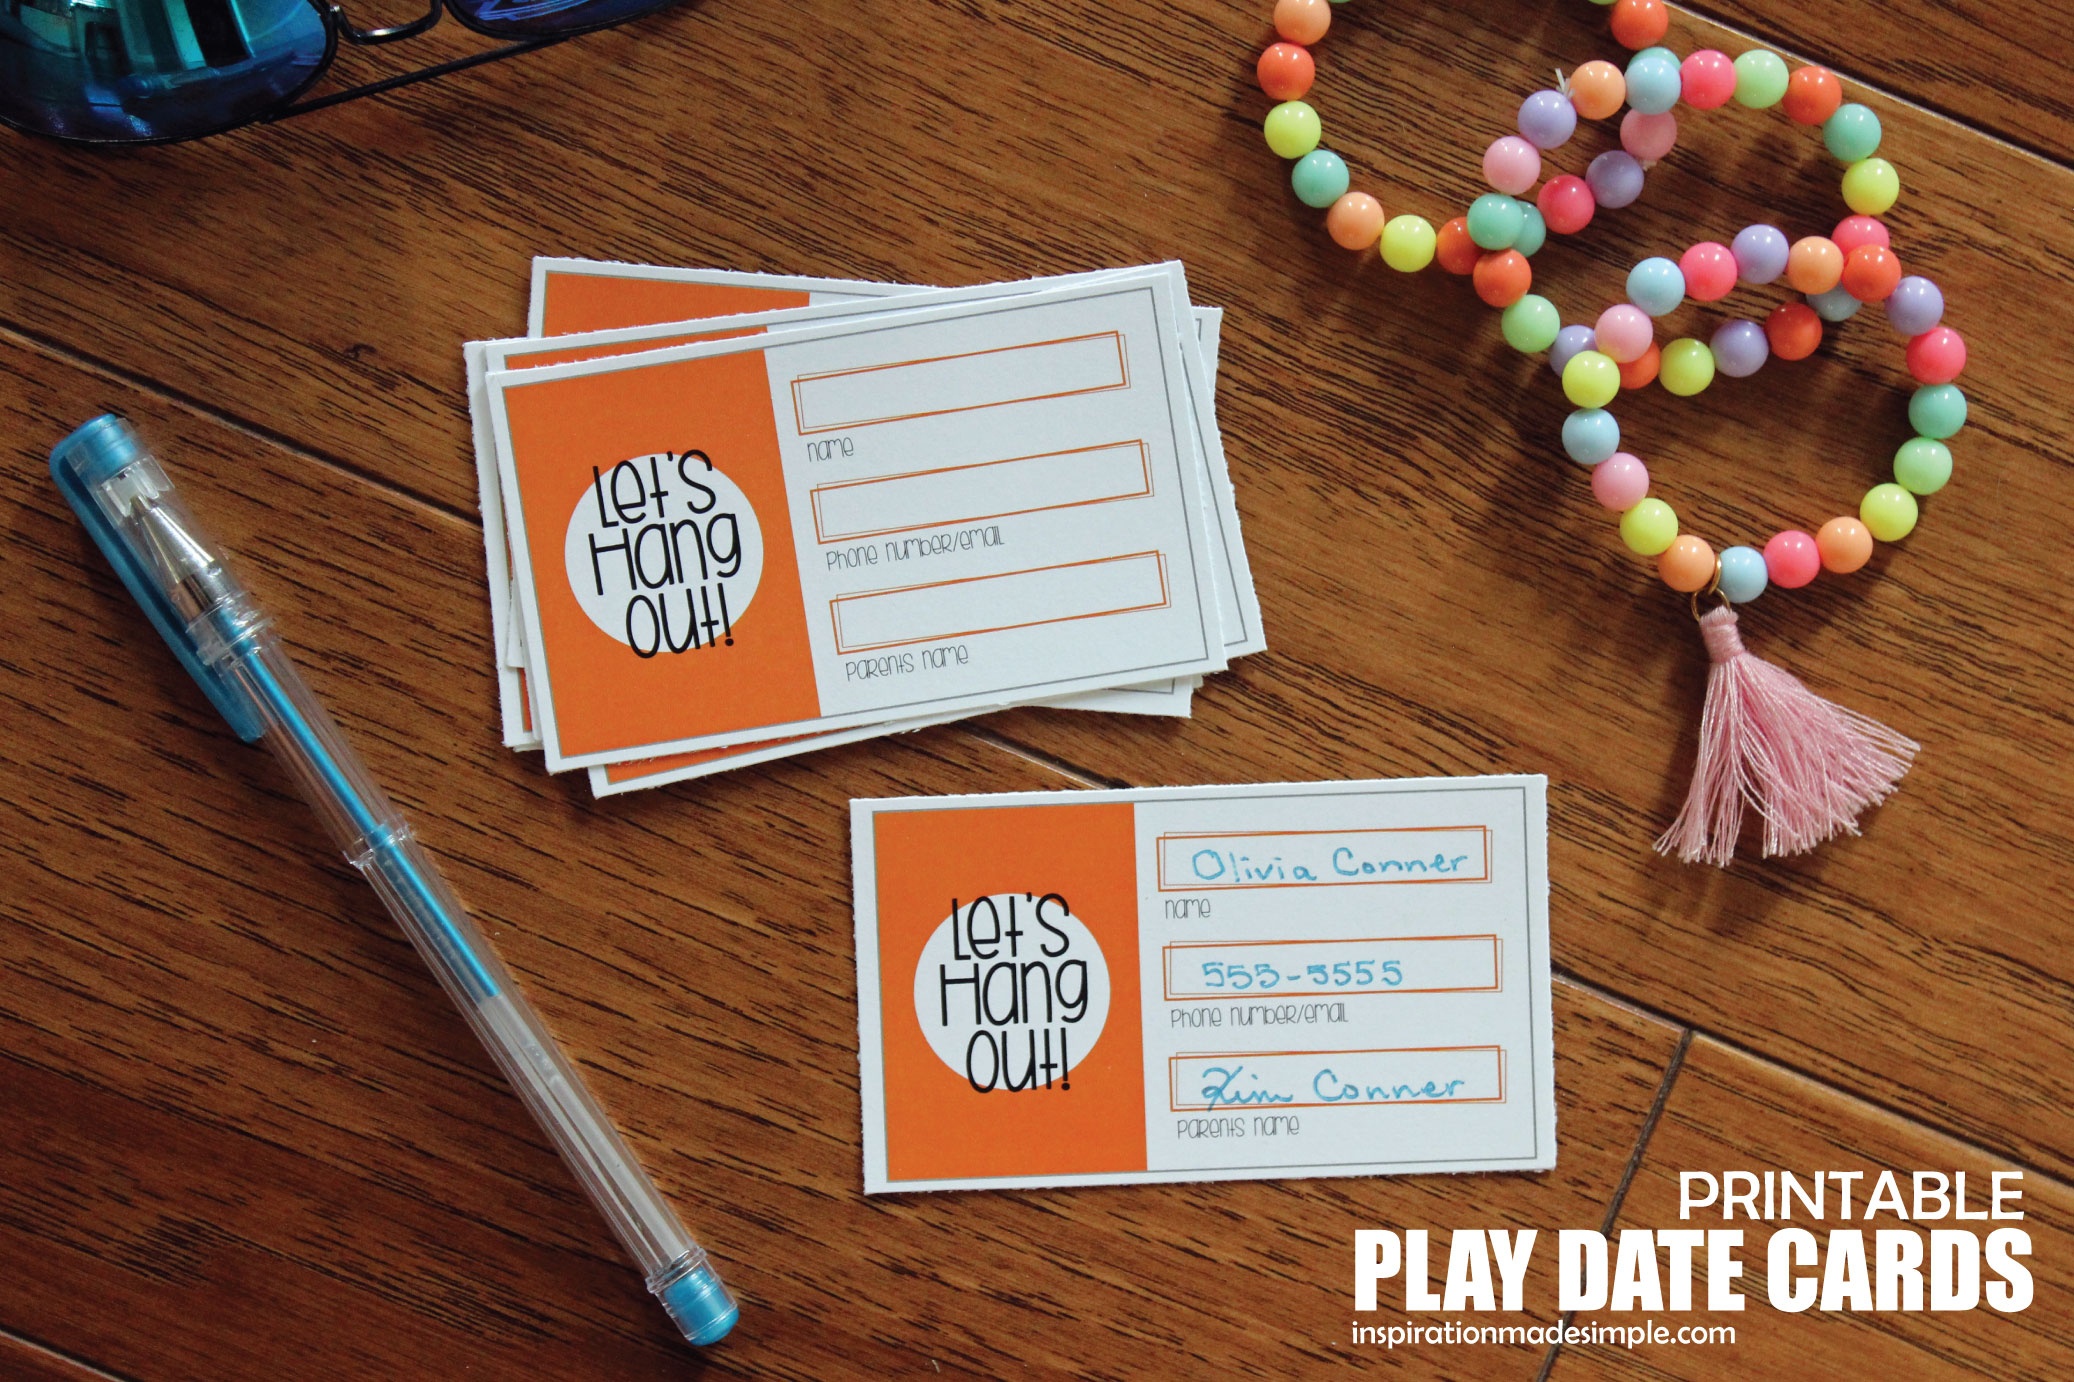 Printable Play Date Cards For Kids - Inspiration Made Simple - Free Printable Play Date Cards